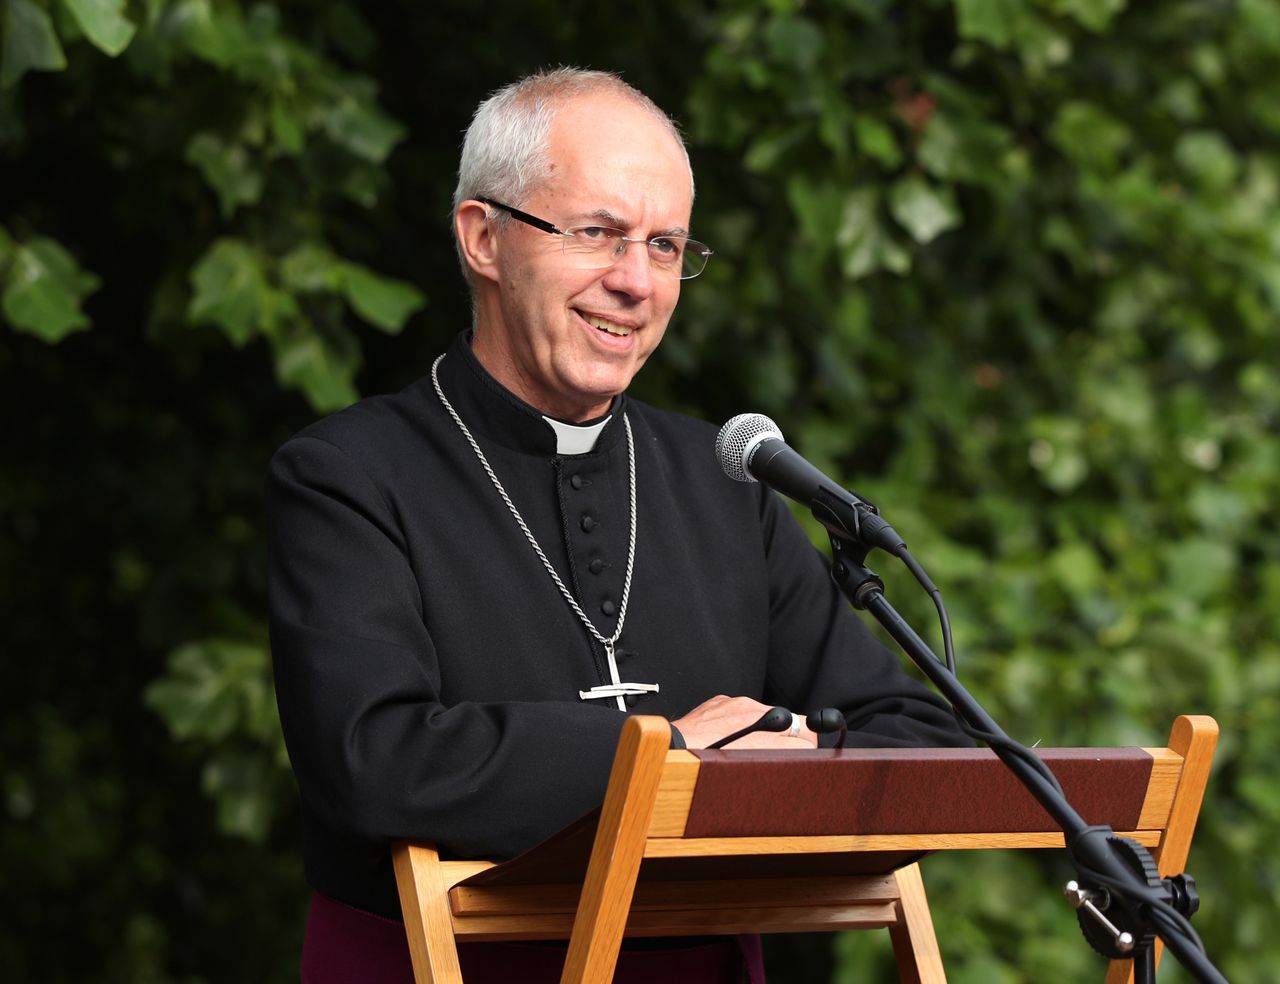 IPPR commission member Justin Welby